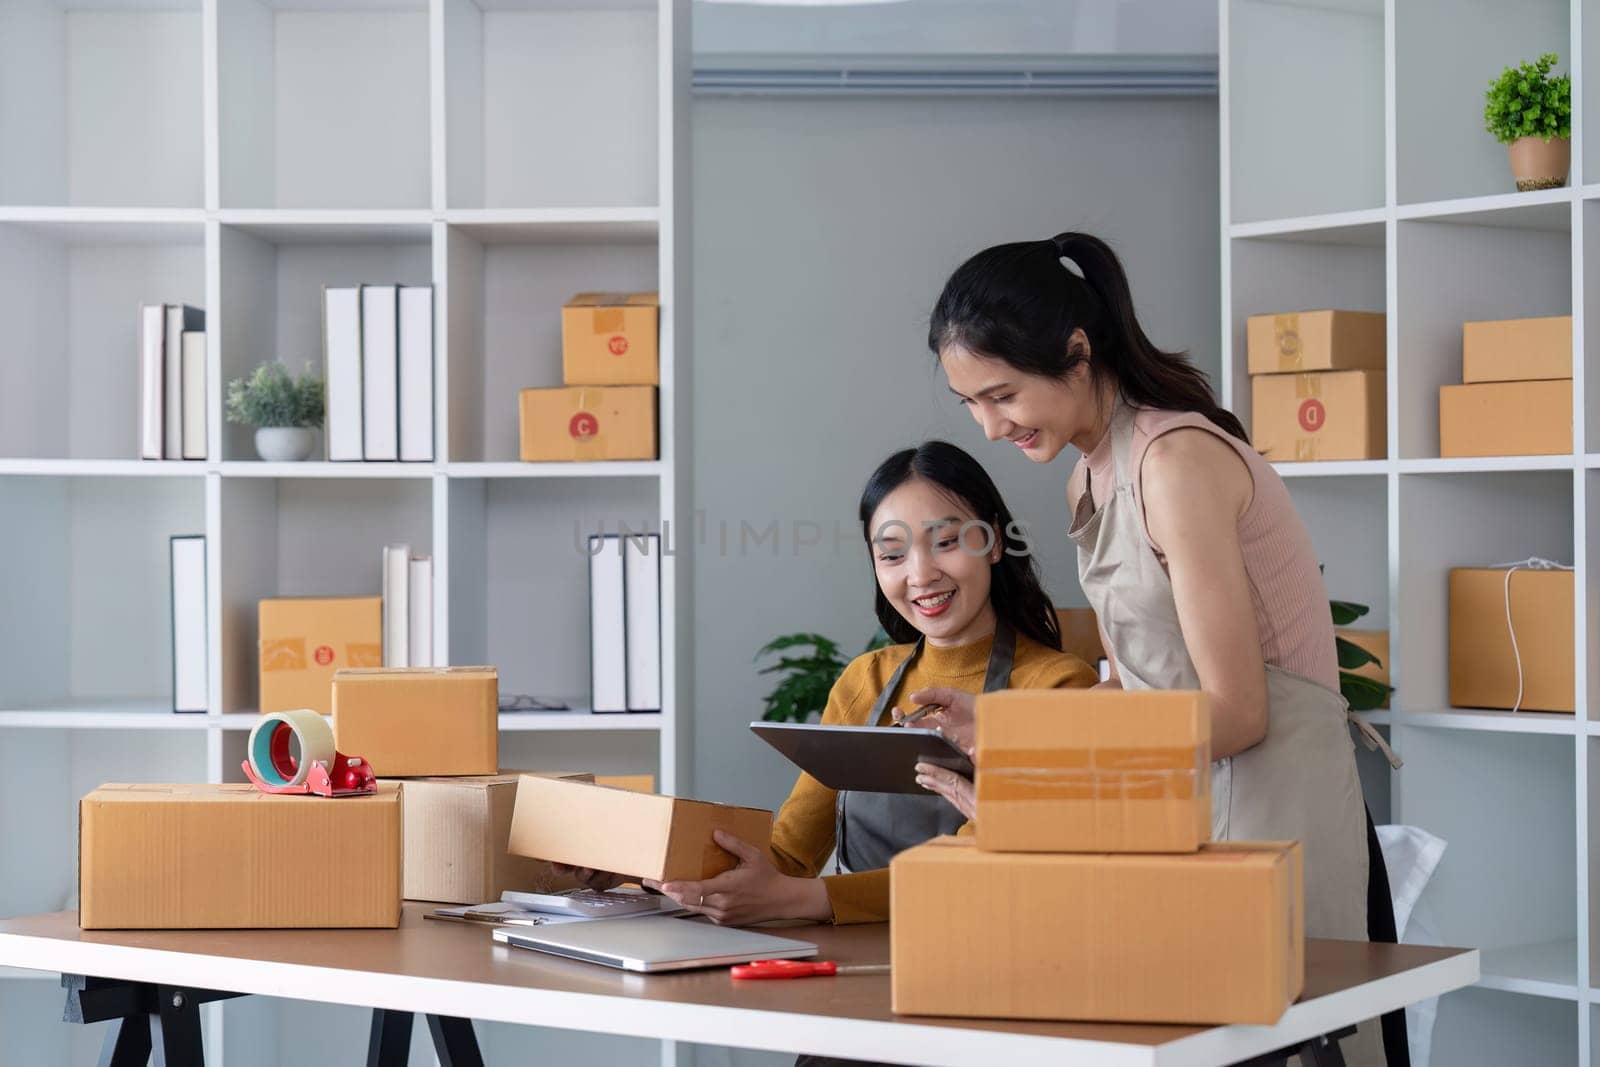 Asian women running a successful online business packaging orders and managing inventory. Concept of entrepreneurship, e-commerce, and teamwork.